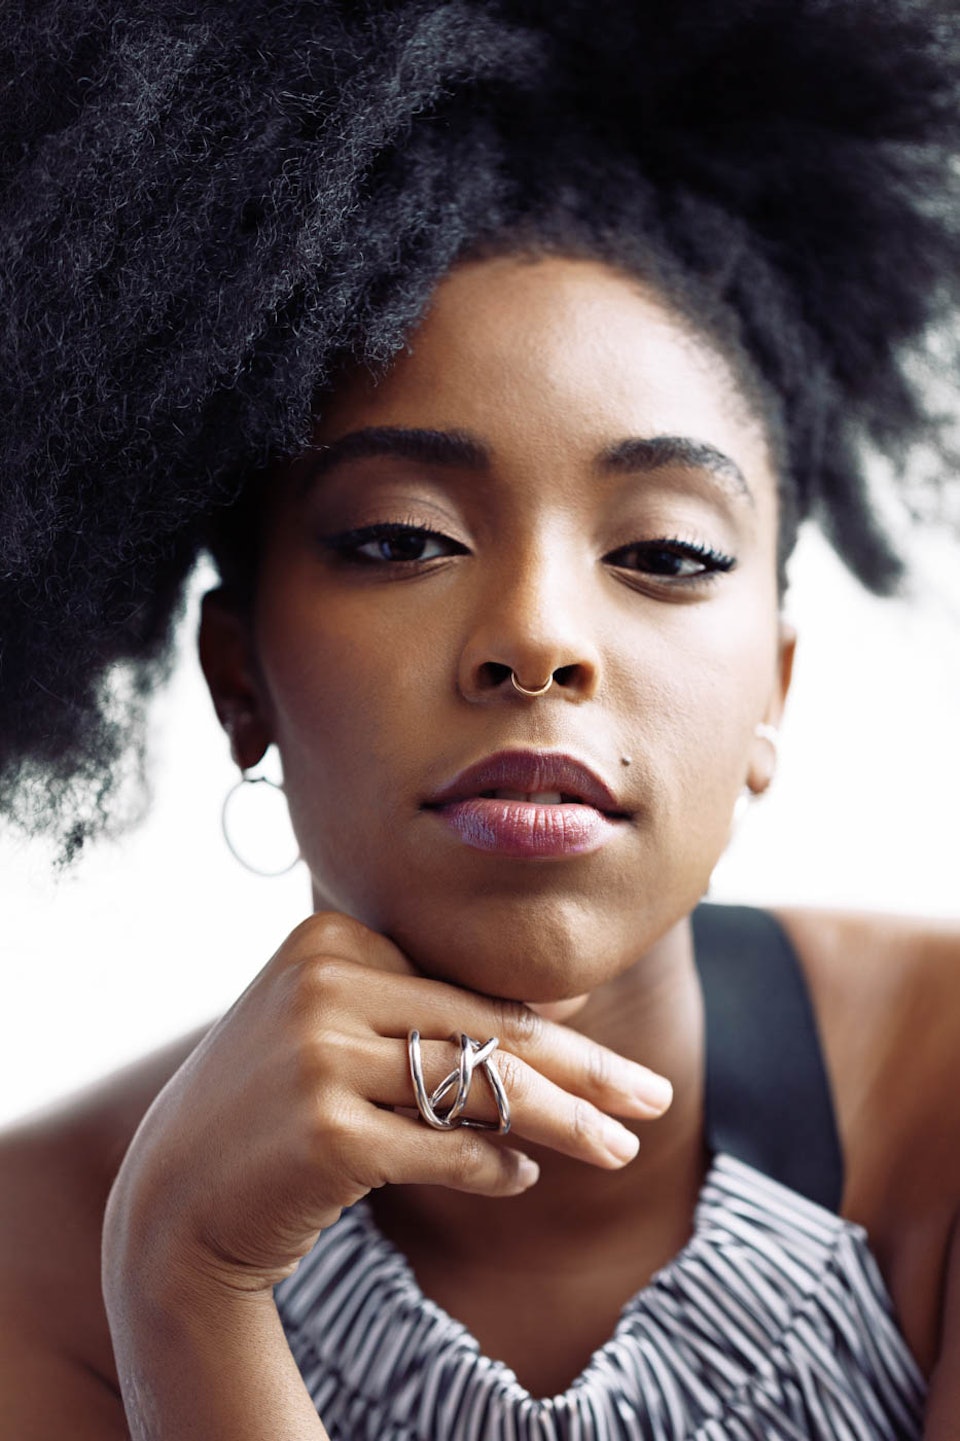 Jessica Williams Won't Let Anyone Make Her Apologize For Being Herself